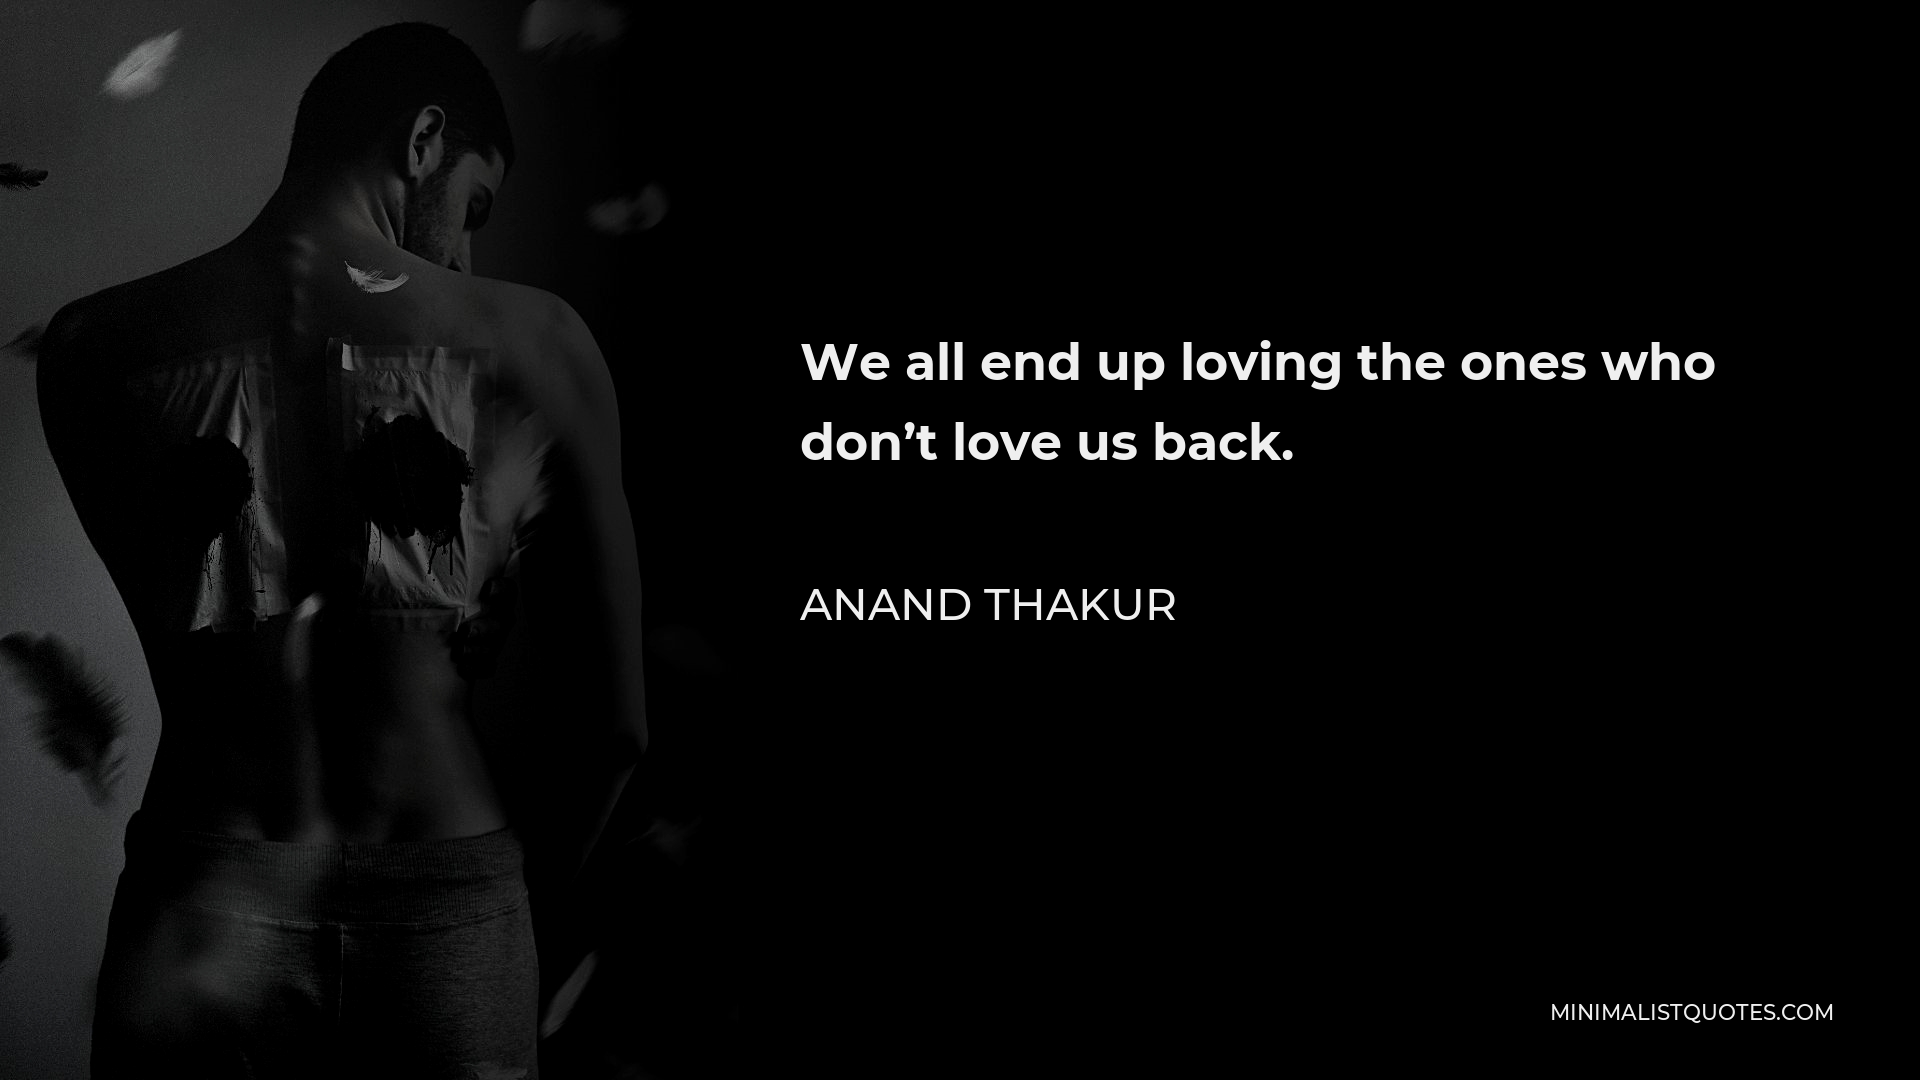 Anand Thakur Quote - We all end up loving the ones who don’t love us back. 